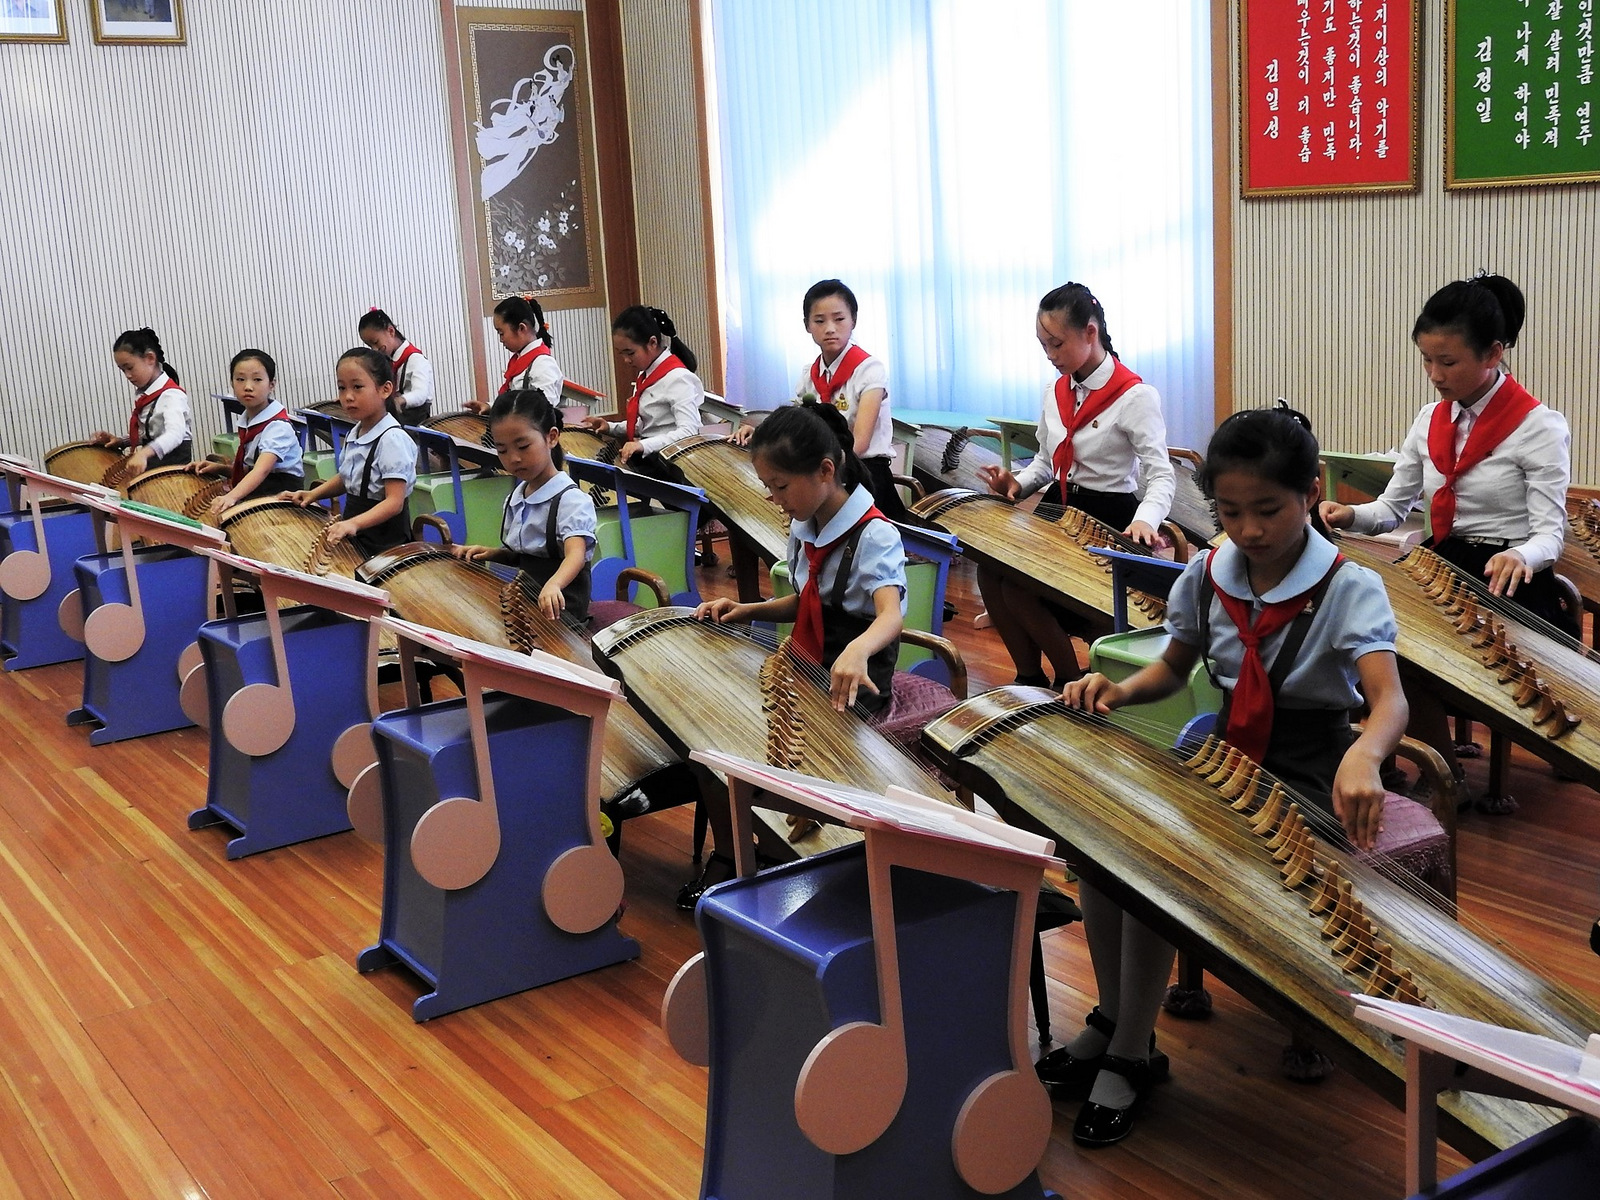 Students at the Mangyongdae Children's Palace playing the traditional Korean instrument, the kayagun. Listen to their performance here.